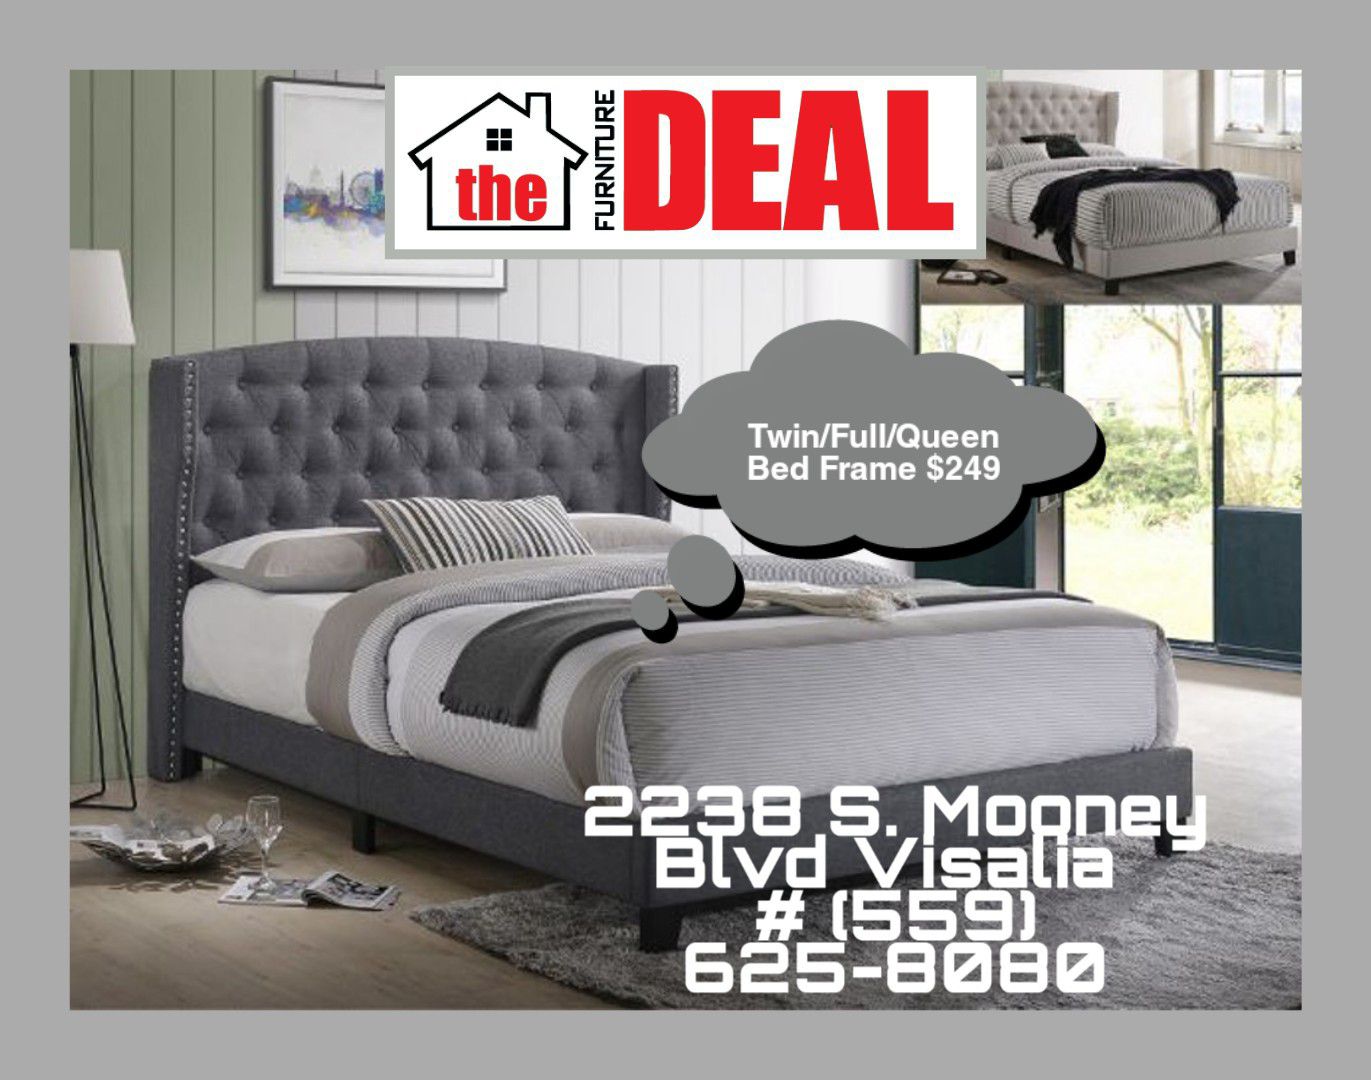 Twin/Full/Queen Bed Frame $249 Add $50 For Eastern-King or Cal-King